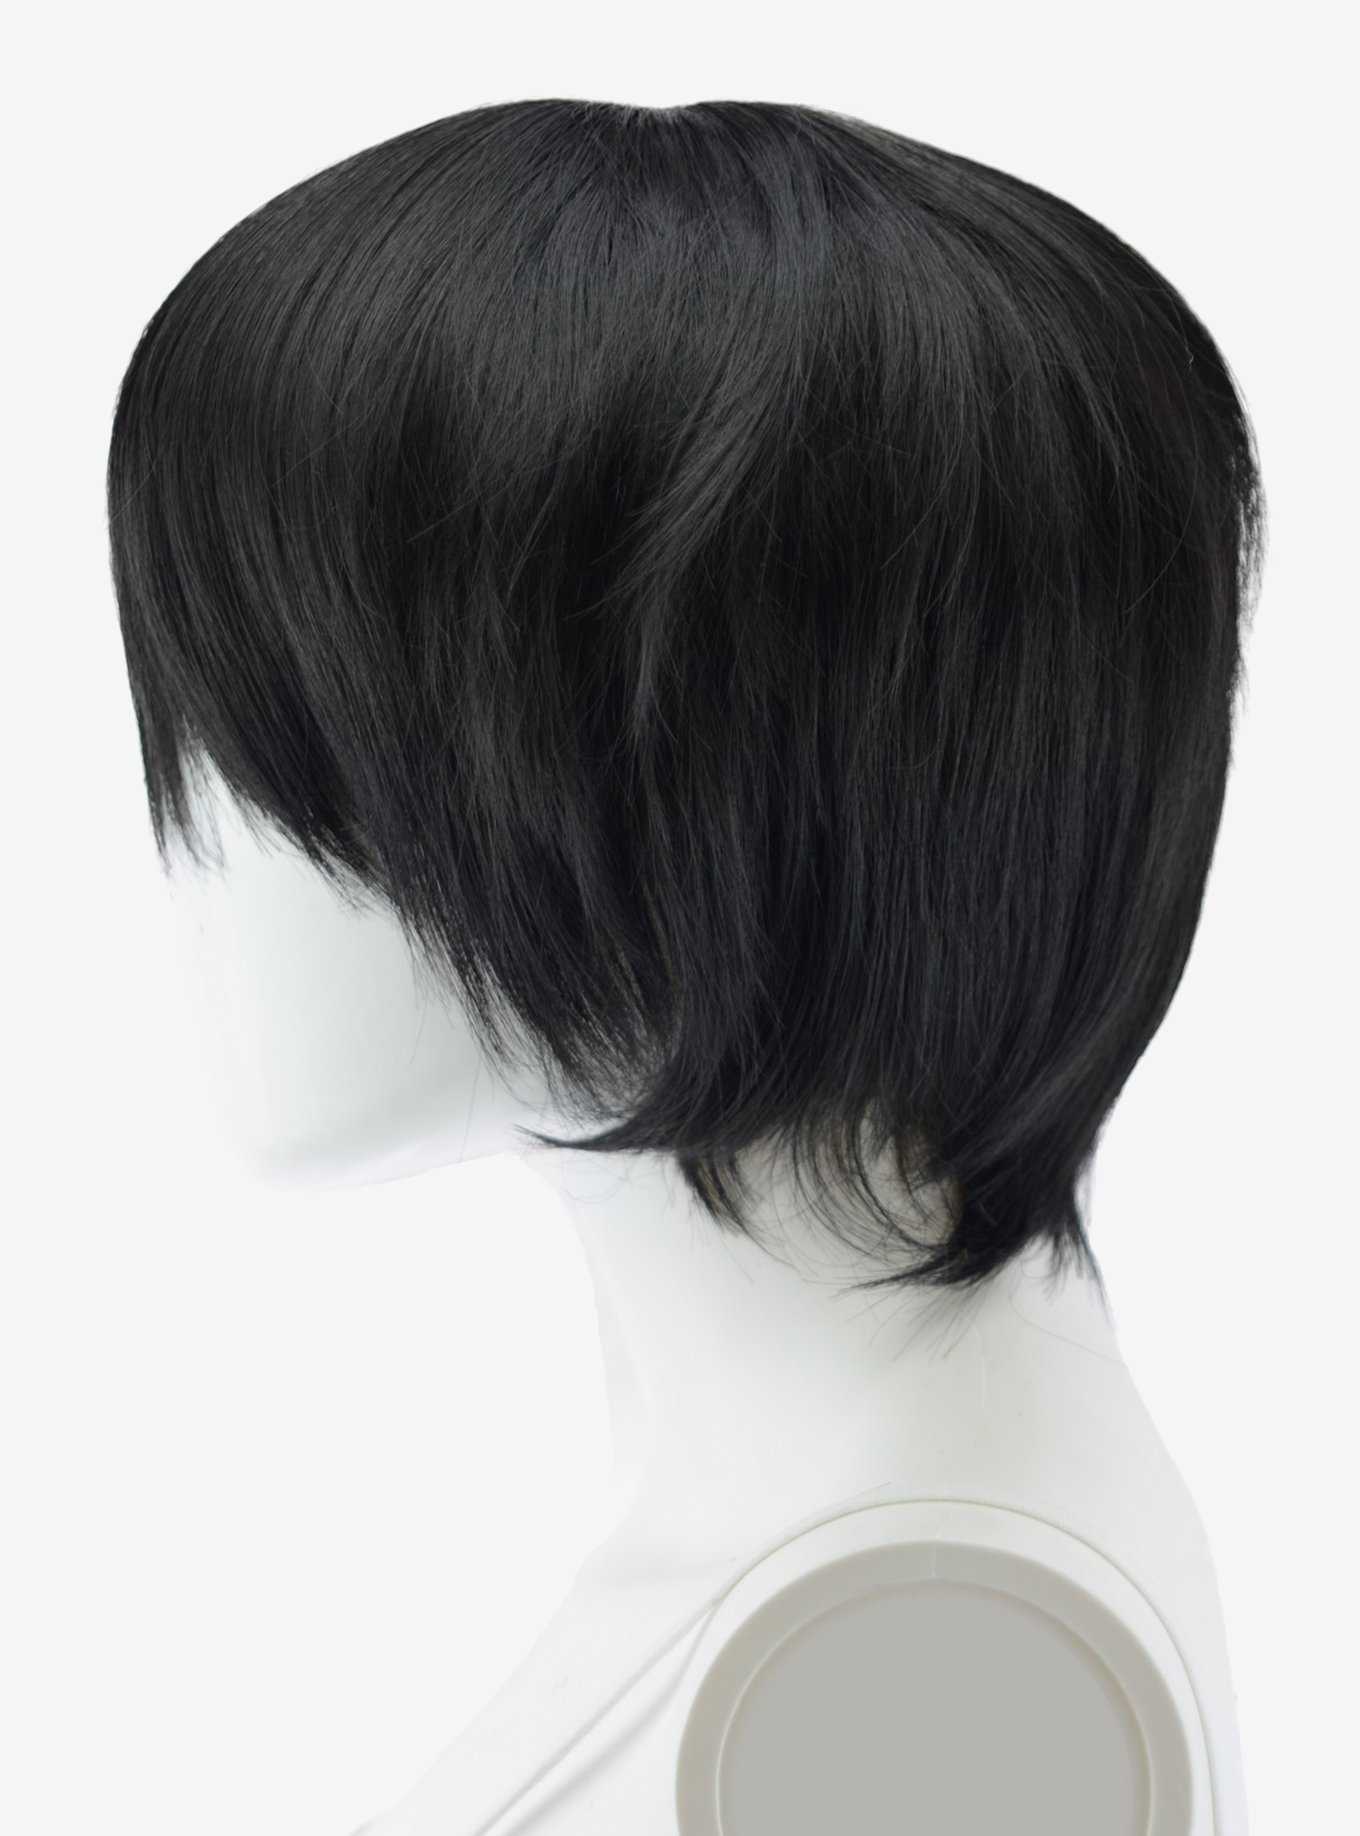 Epic Cosplay Aether Black Layered Short Wig, , hi-res